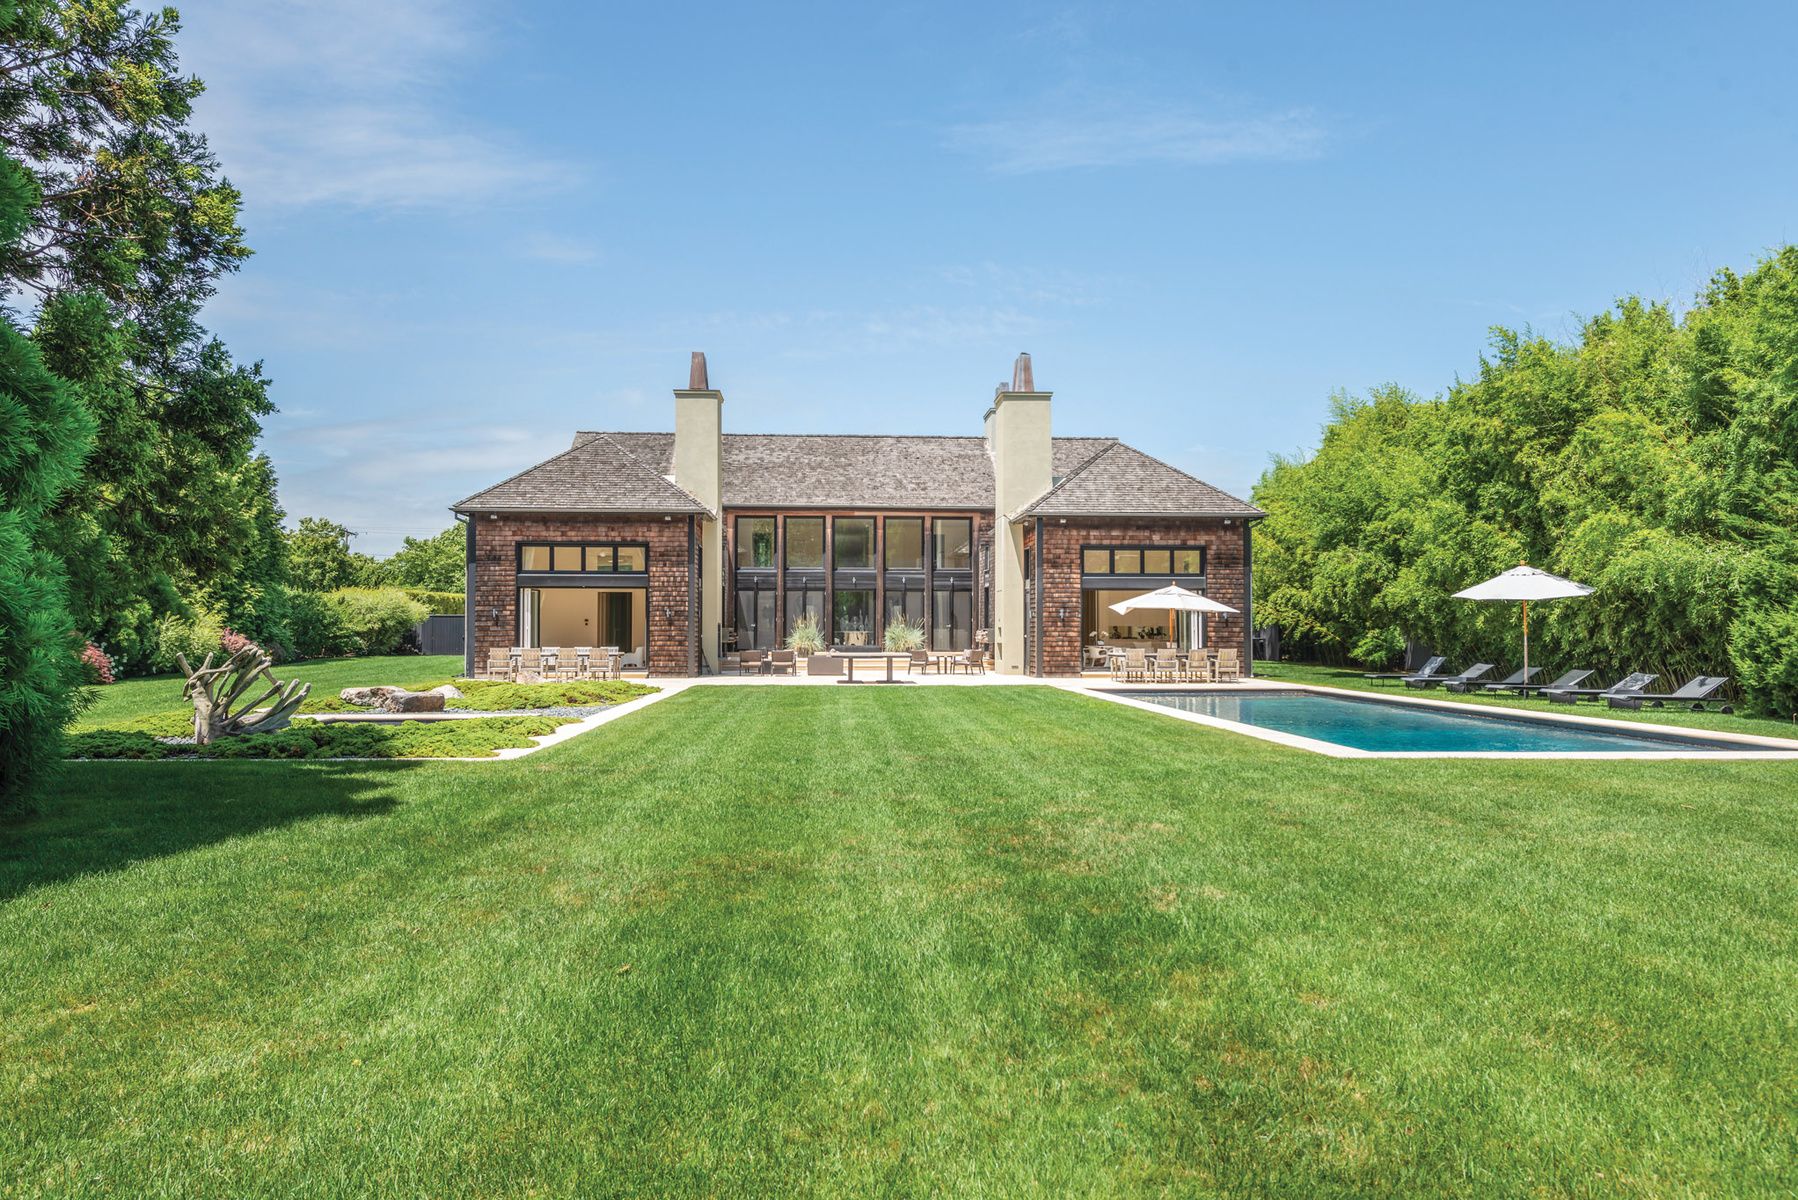 633 Hedges Ln in Sagaponack | Out East